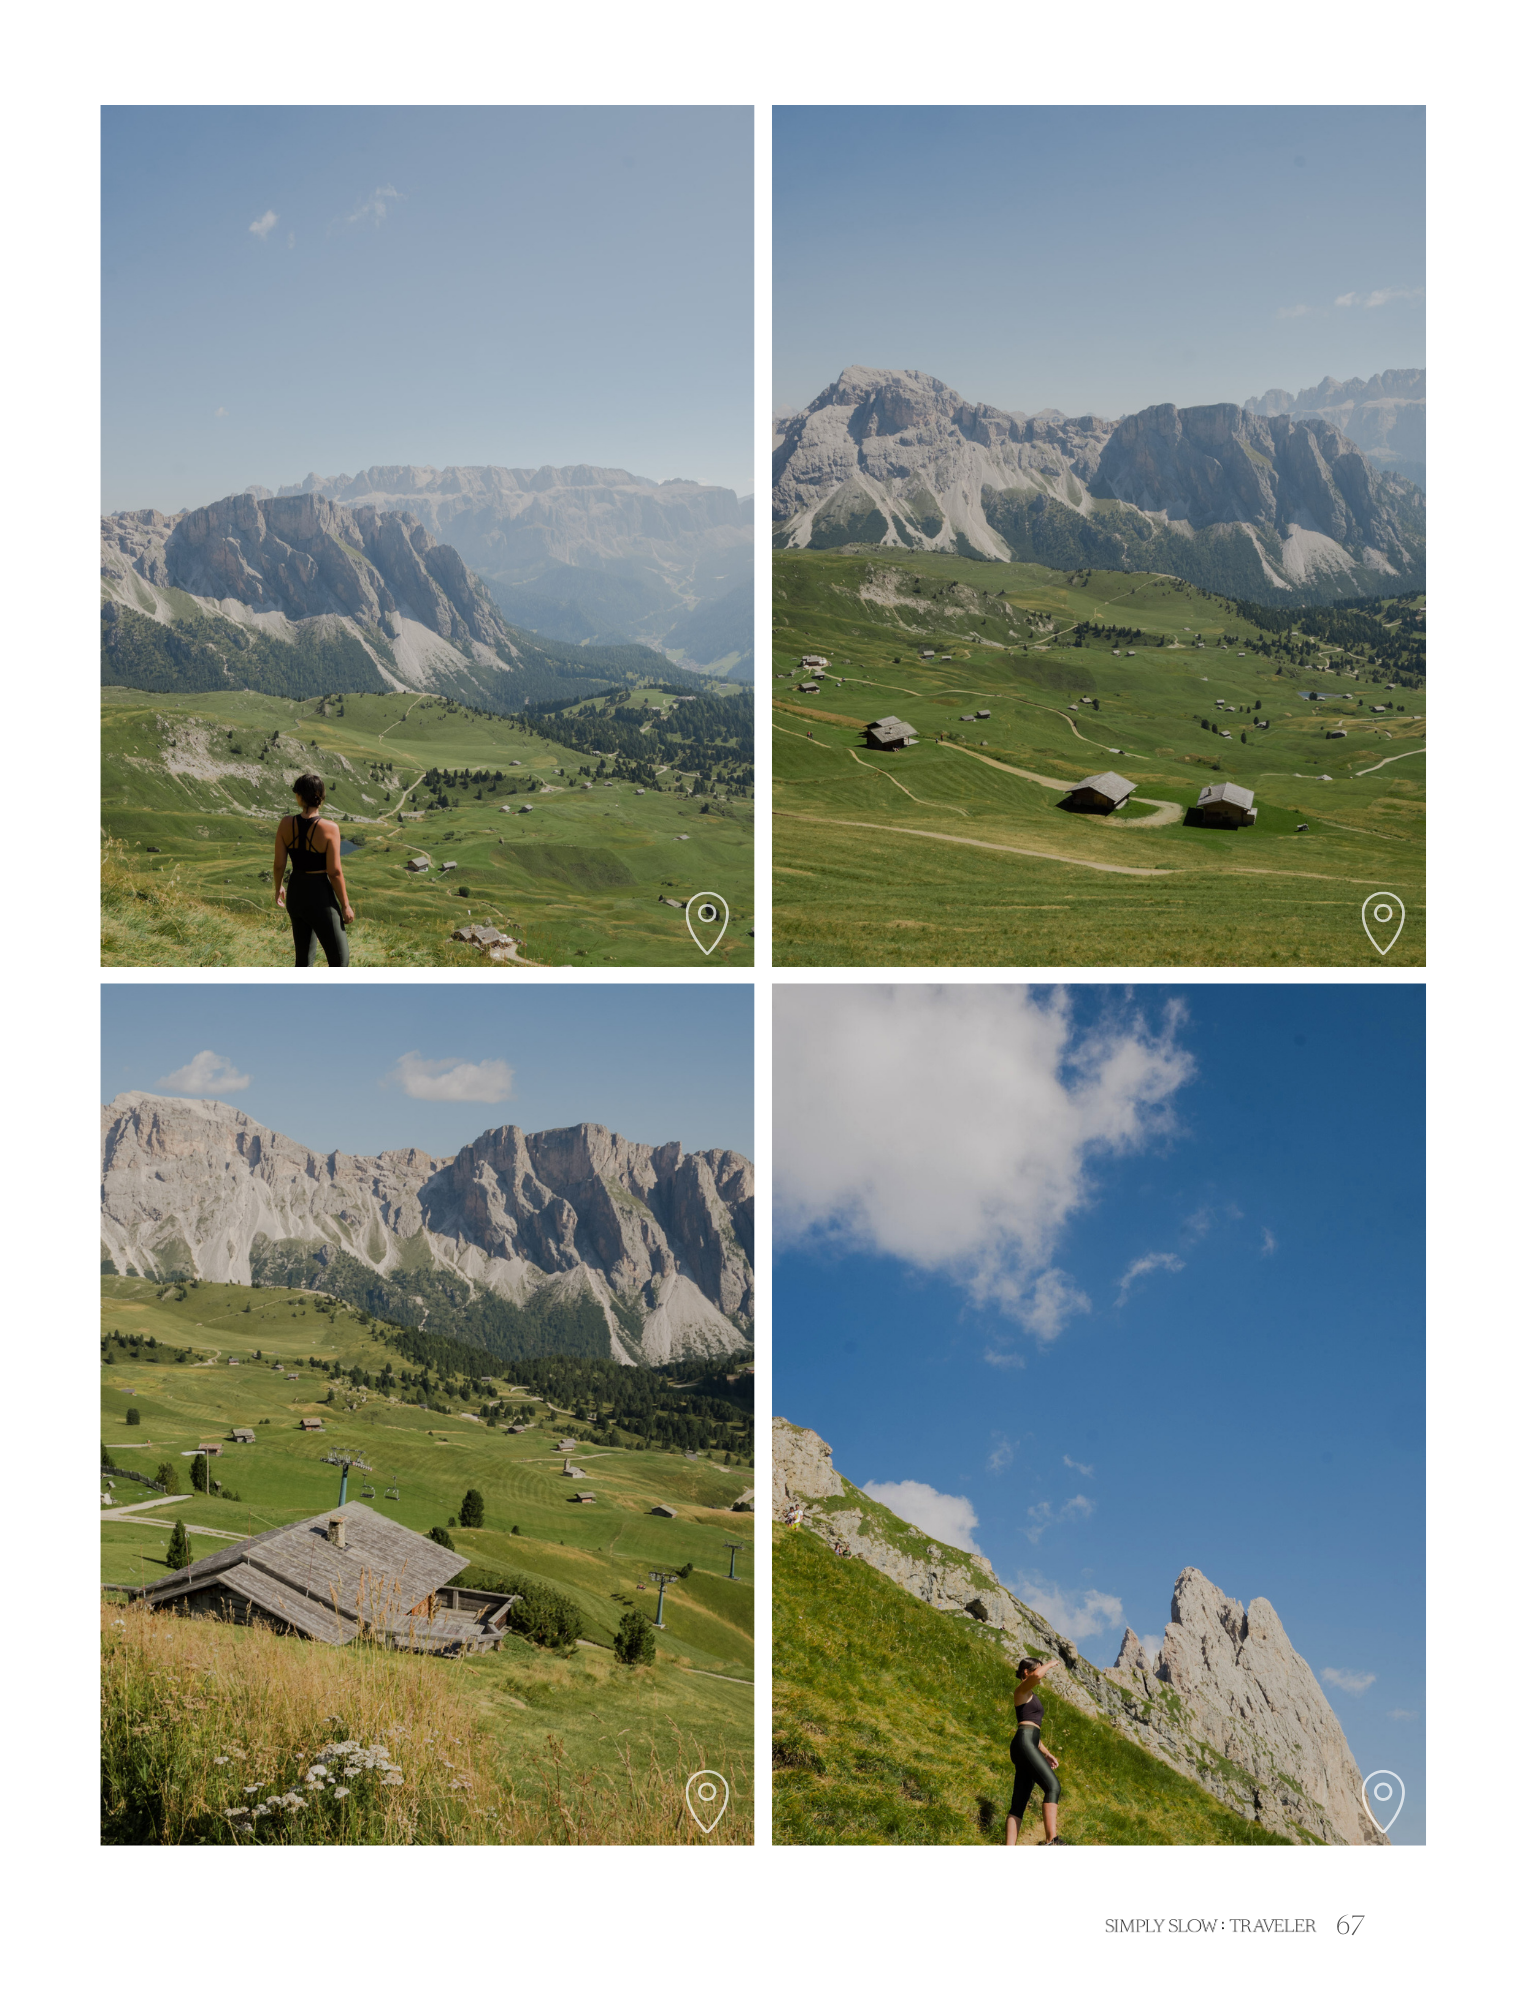 A Guide to the Dolomites - a page with photos of Seceda, by Simply Slow Traveler